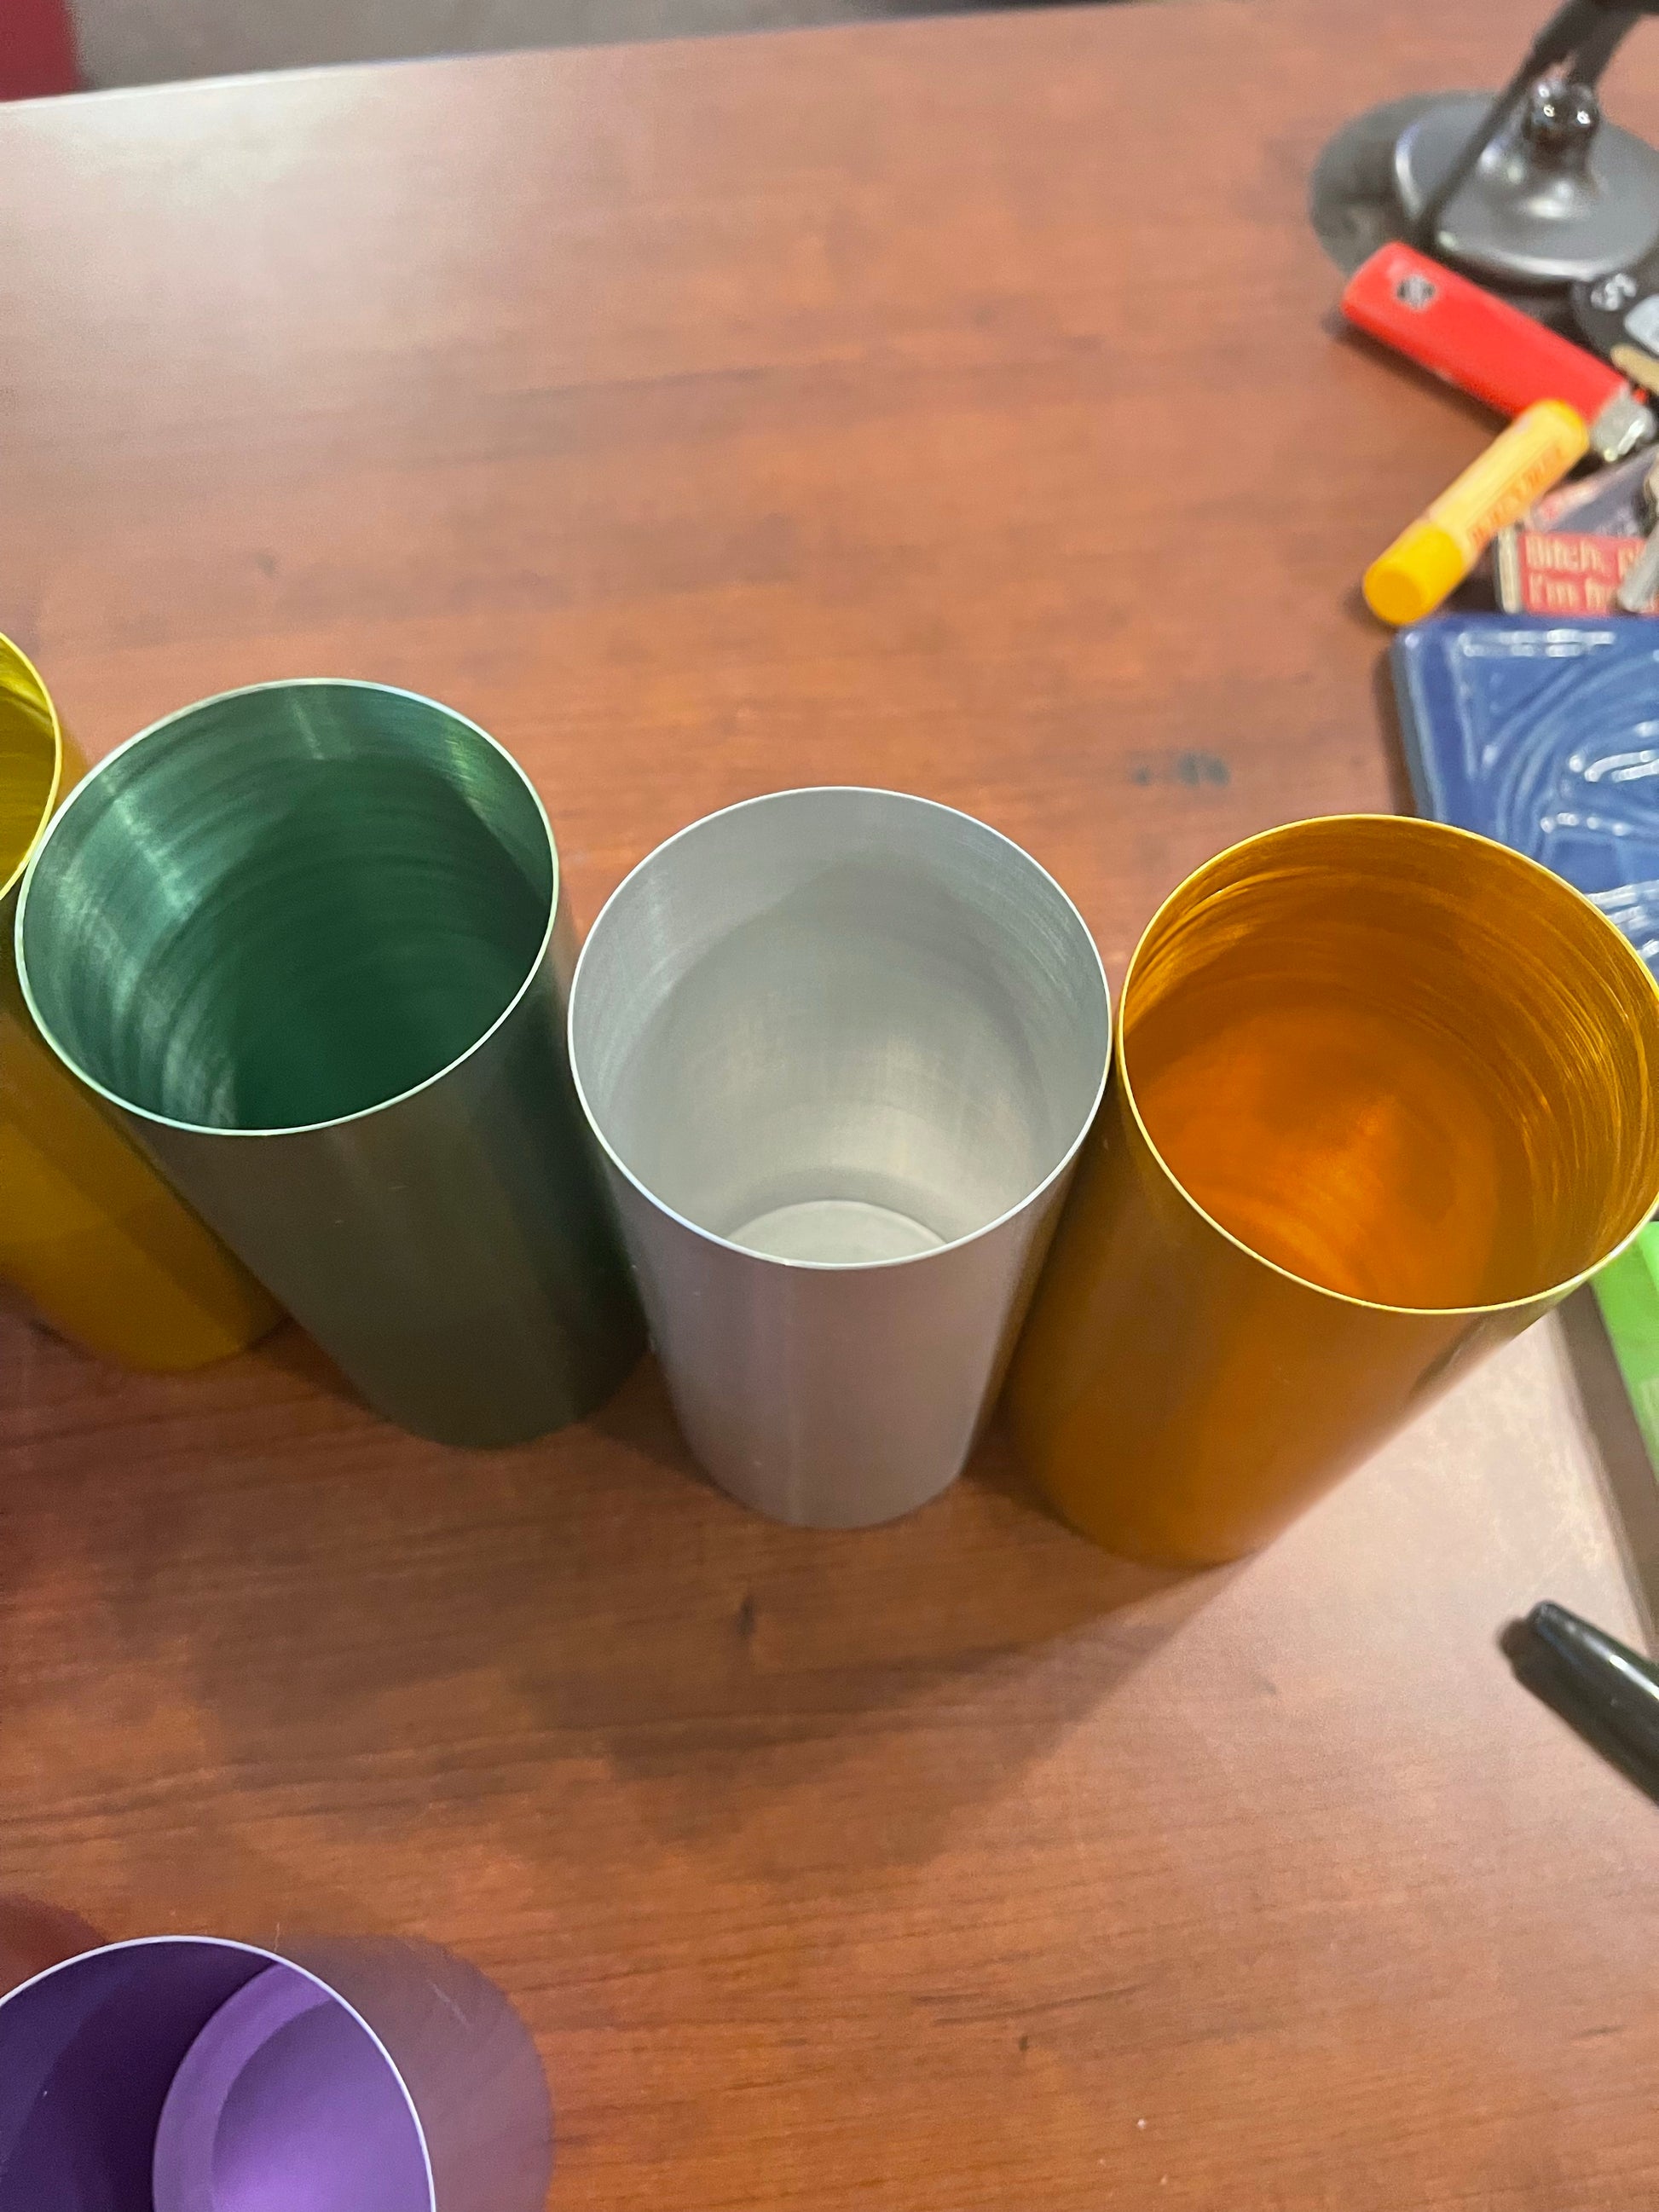 Vintage Multi Color Perma Hues Aluminum Tumblers With Caddy – Long Beach  Antique Mall